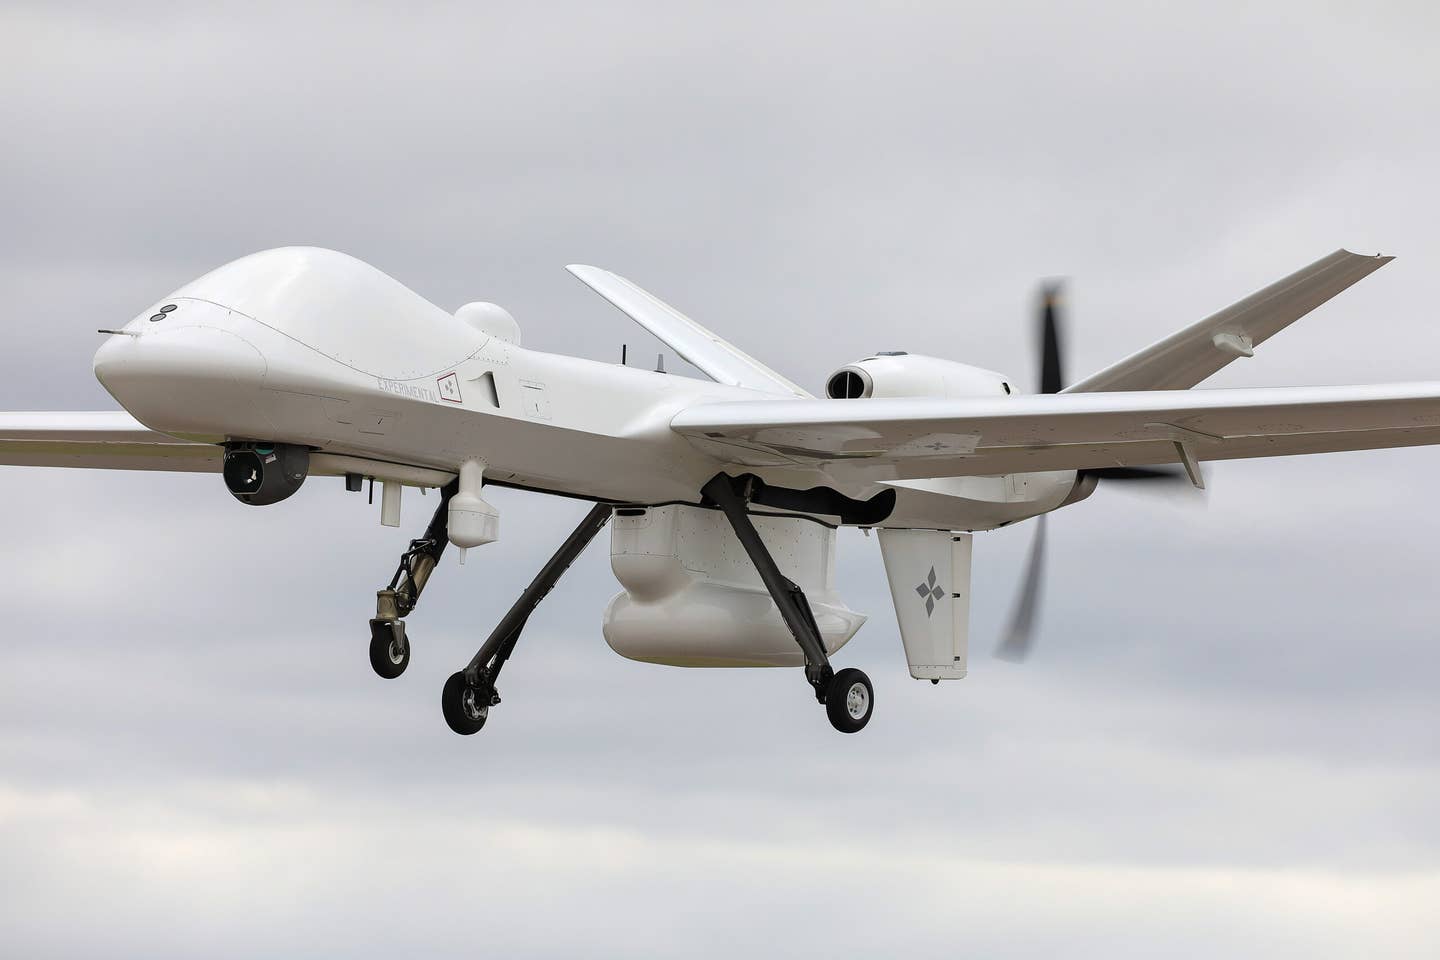 A General Atomics SkyGuardian drone takes off at RAF Waddington in England for the first time, in August 2021. This is a pre-production example of the new Protector drone for the RAF. <em>Crown Copyright</em>